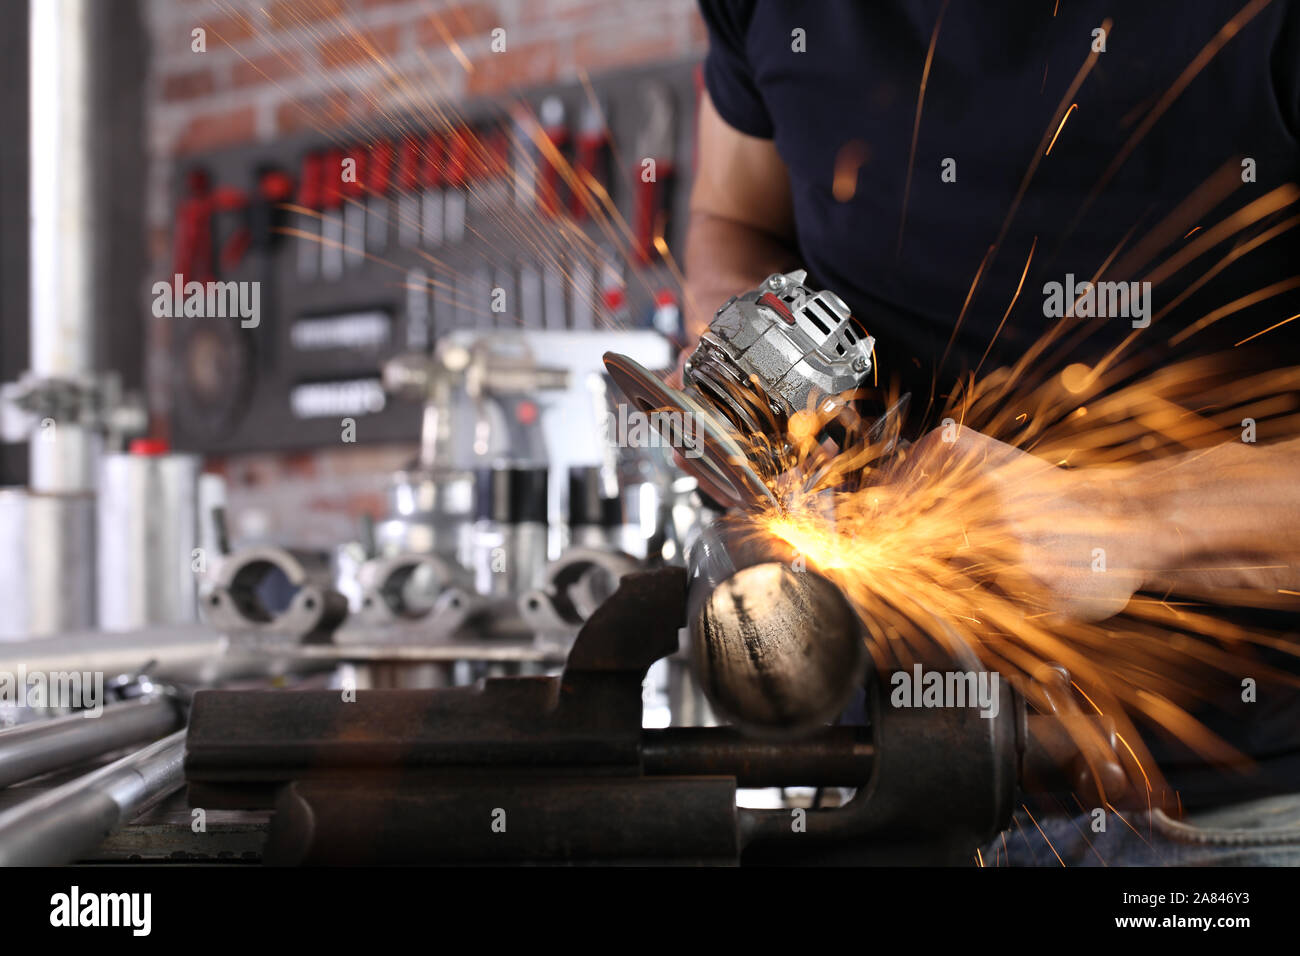 hands man work in home workshop garage with angle grinder, sanding metal makes sparks closeup, diy and craft concept Stock Photo